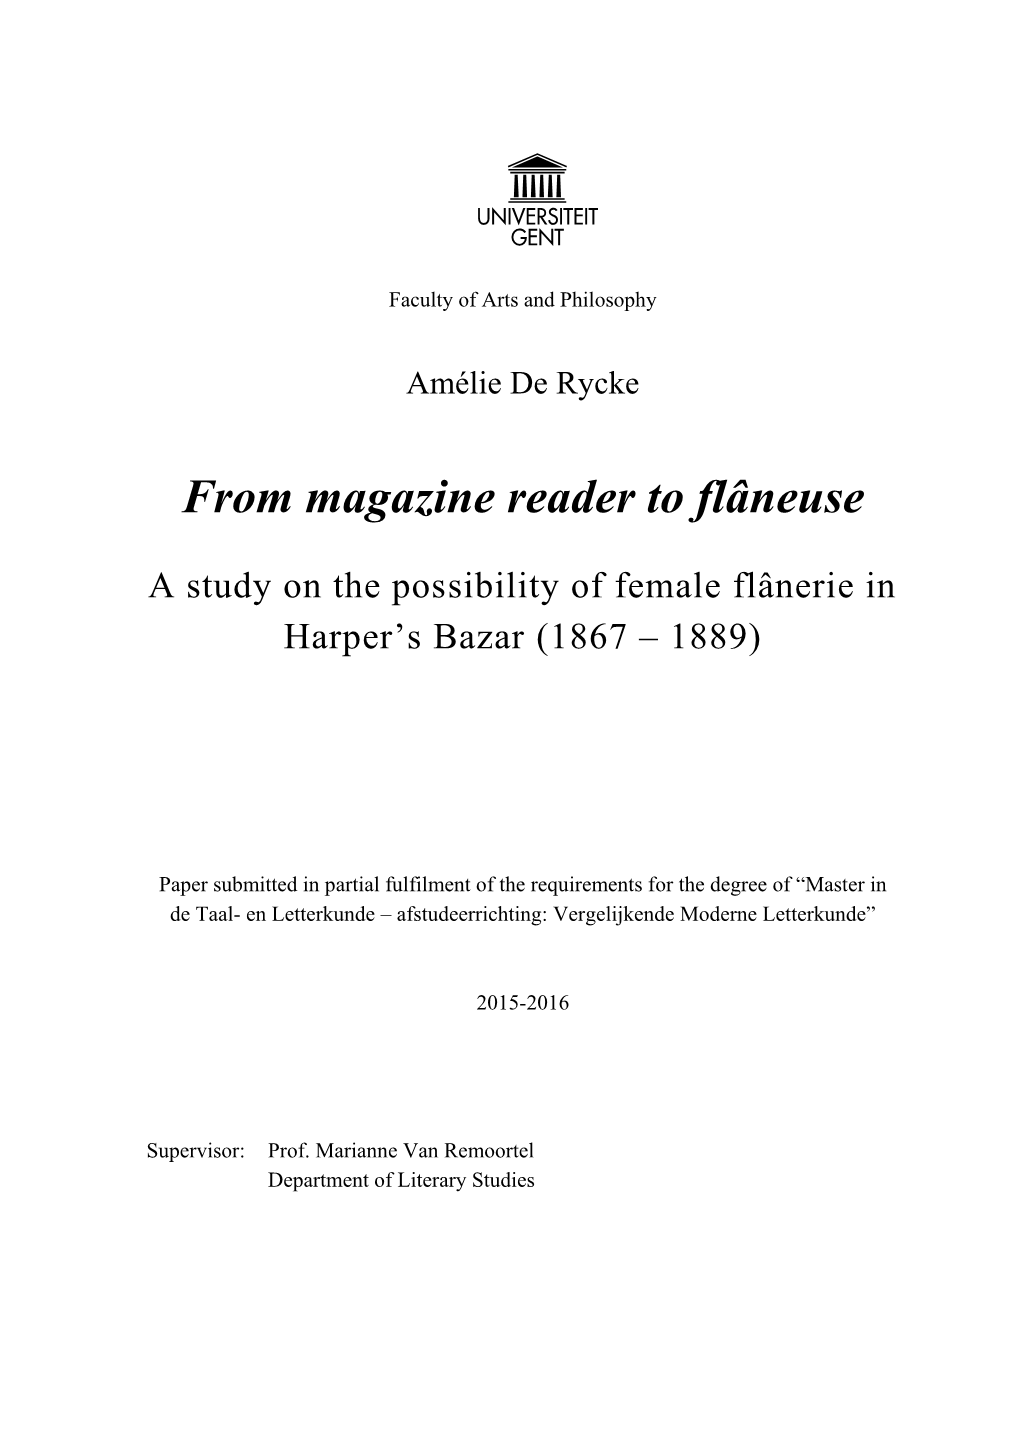 From Magazine Reader to Flâneuse